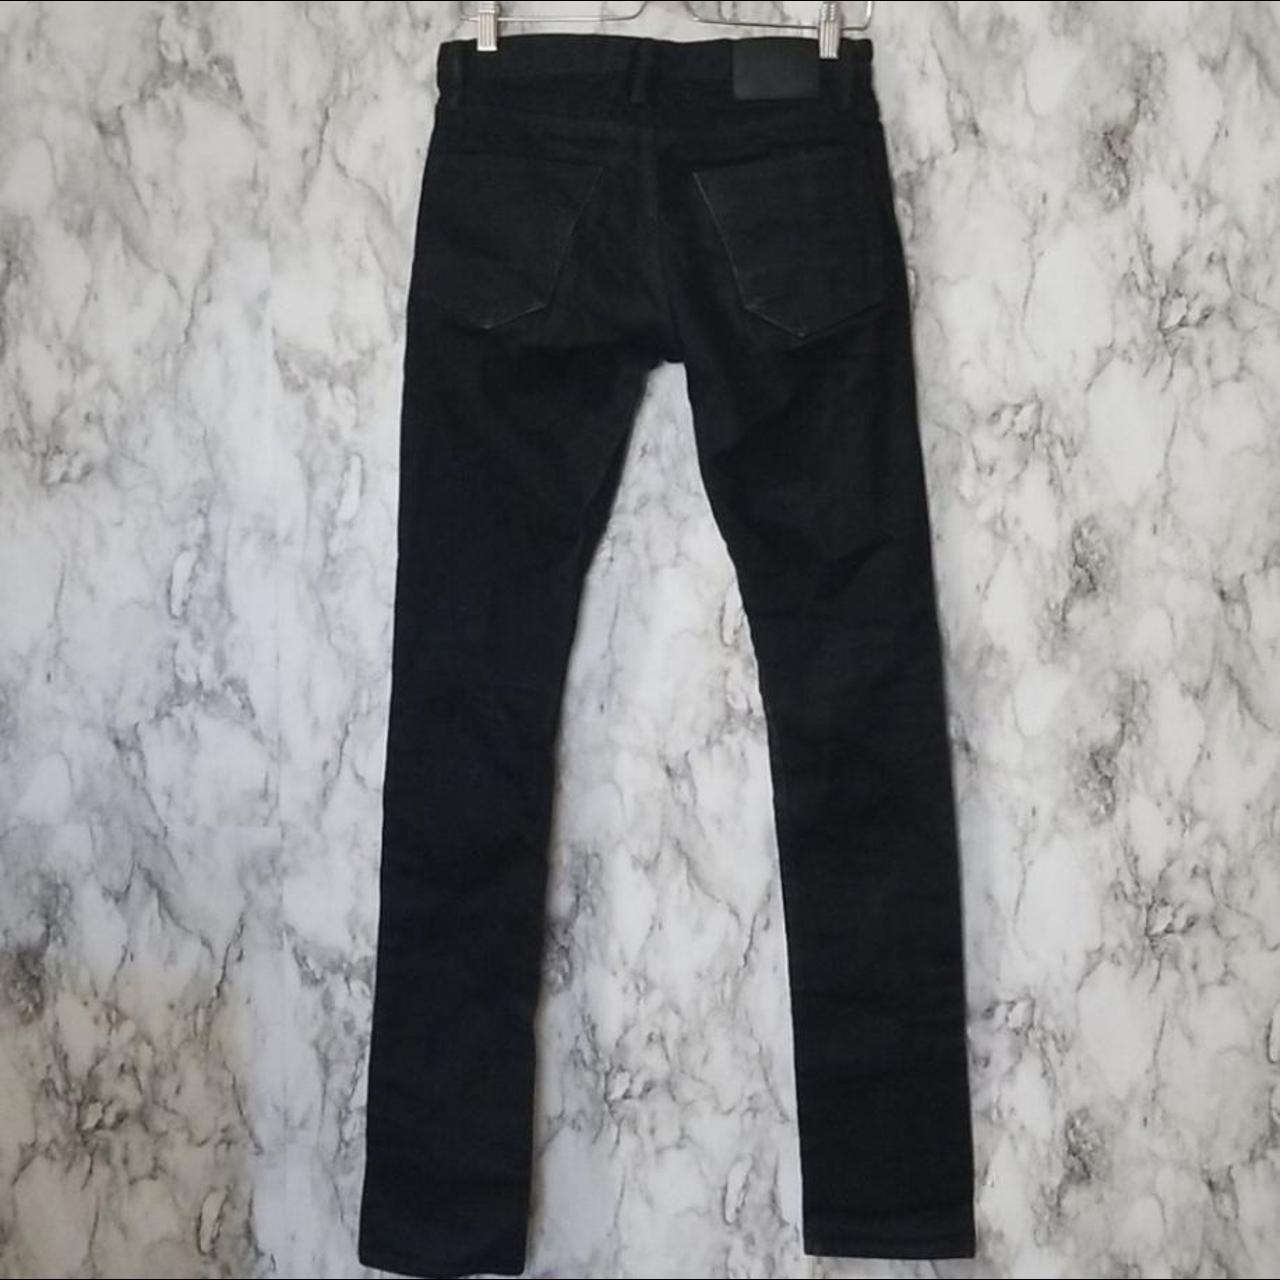 Product Image 2 - Rogue Territory Denim

Up for consideration